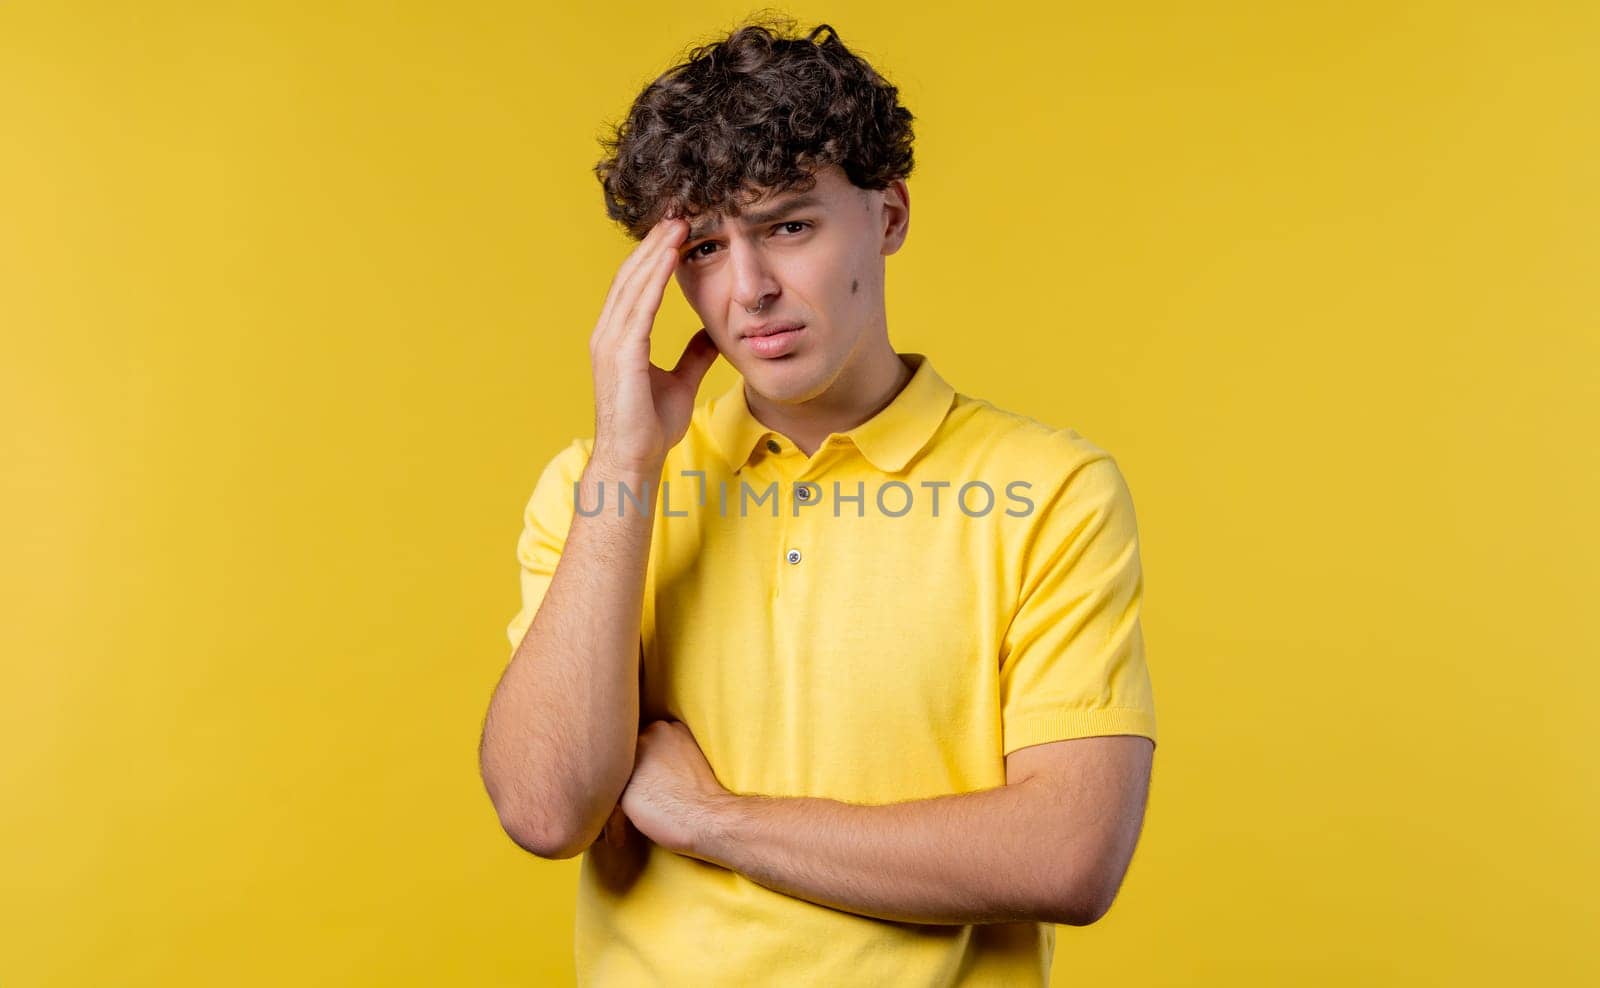 Young man having headache, studio portrait. Guy putting hands on head, isolated on yellow background. Concept of problems, medicine, illness